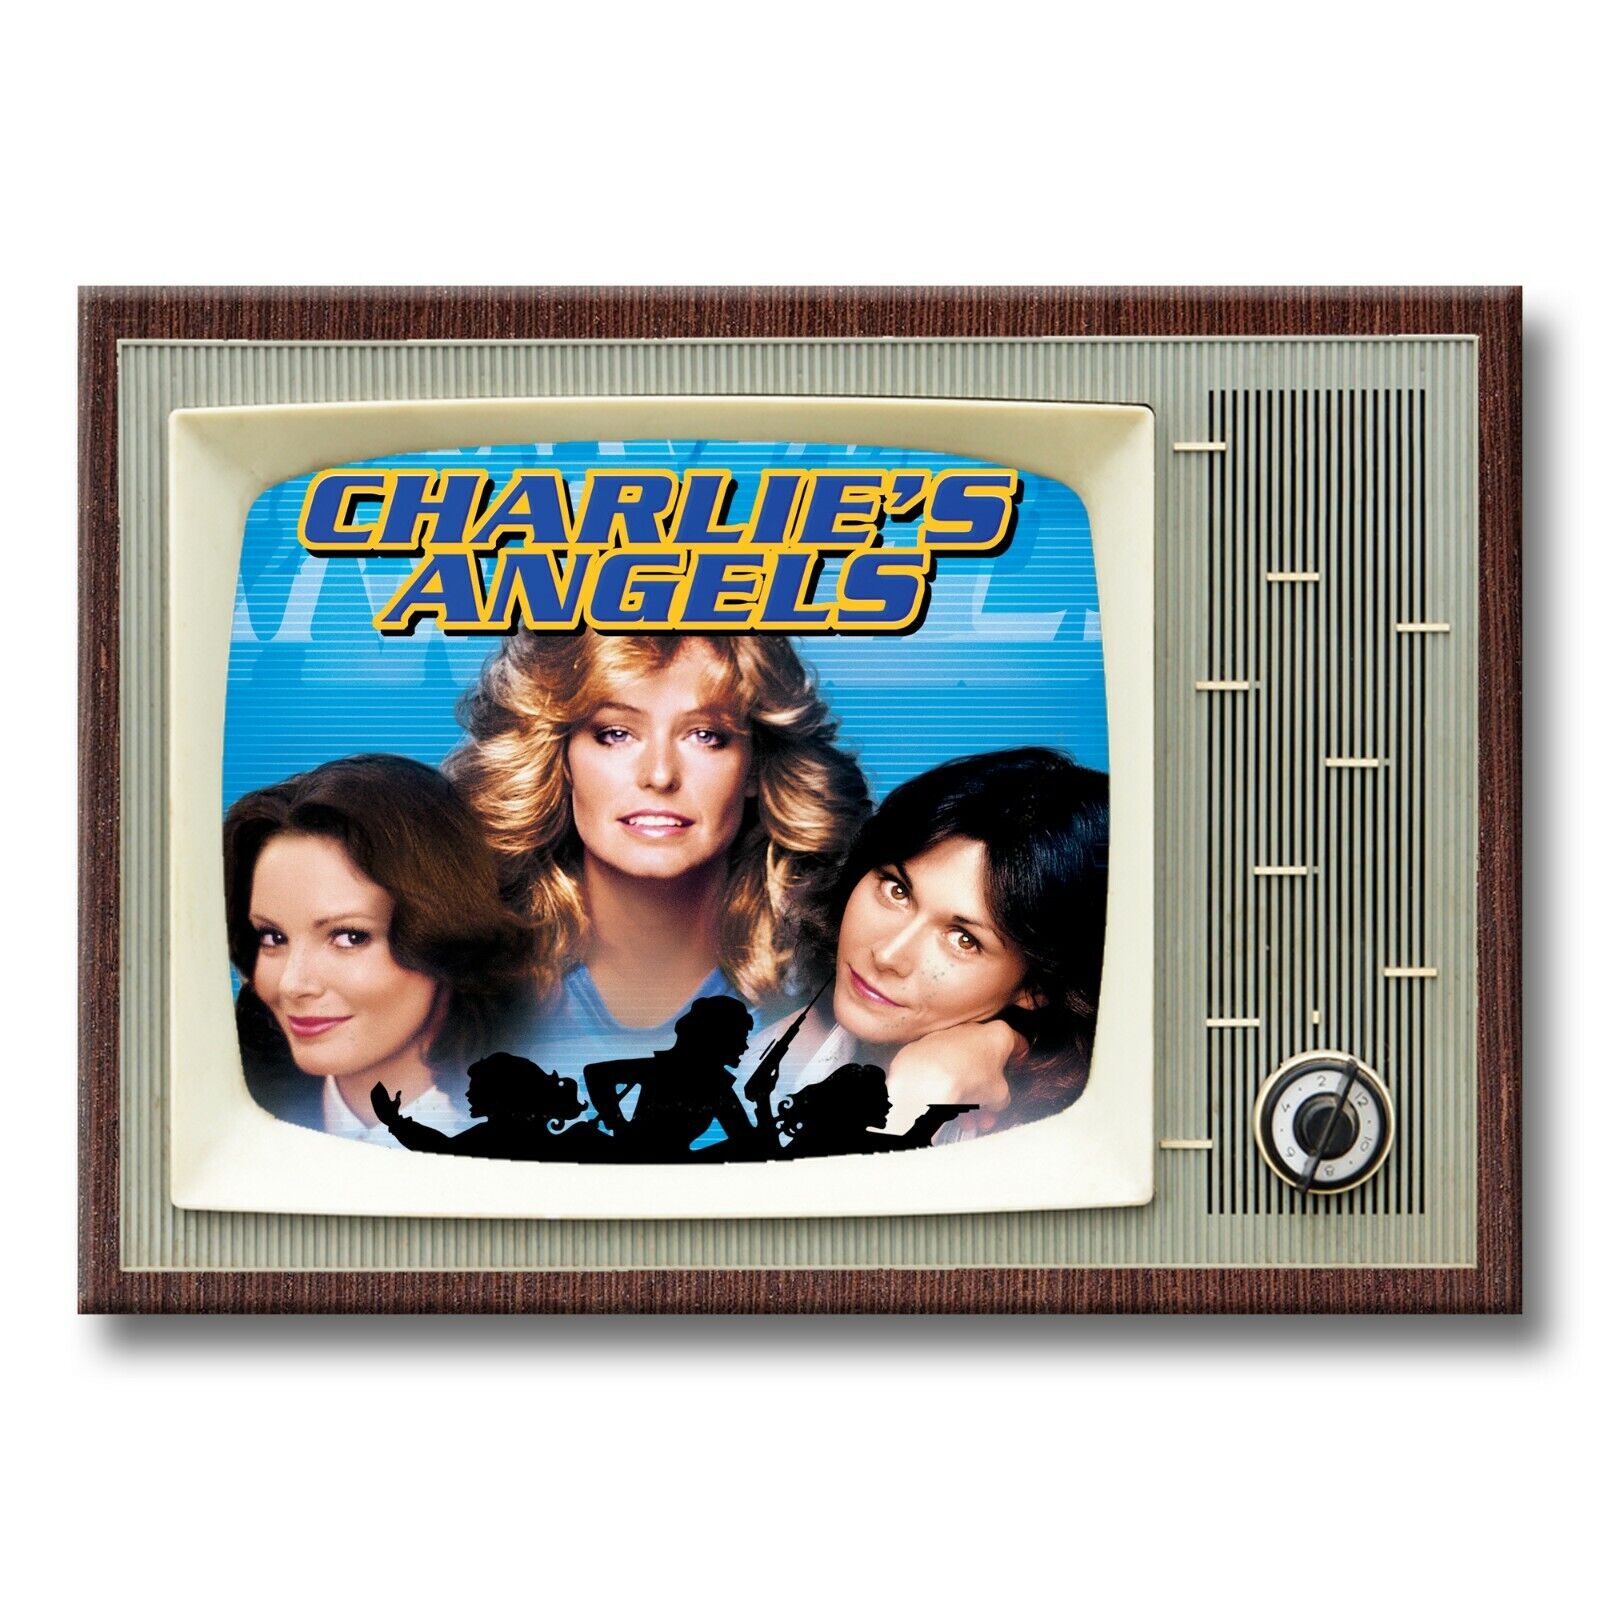 CHARLIES ANGELS TV Show Classic TV 3.5 inches x 2.5 inches Steel FRIDGE MAGNET